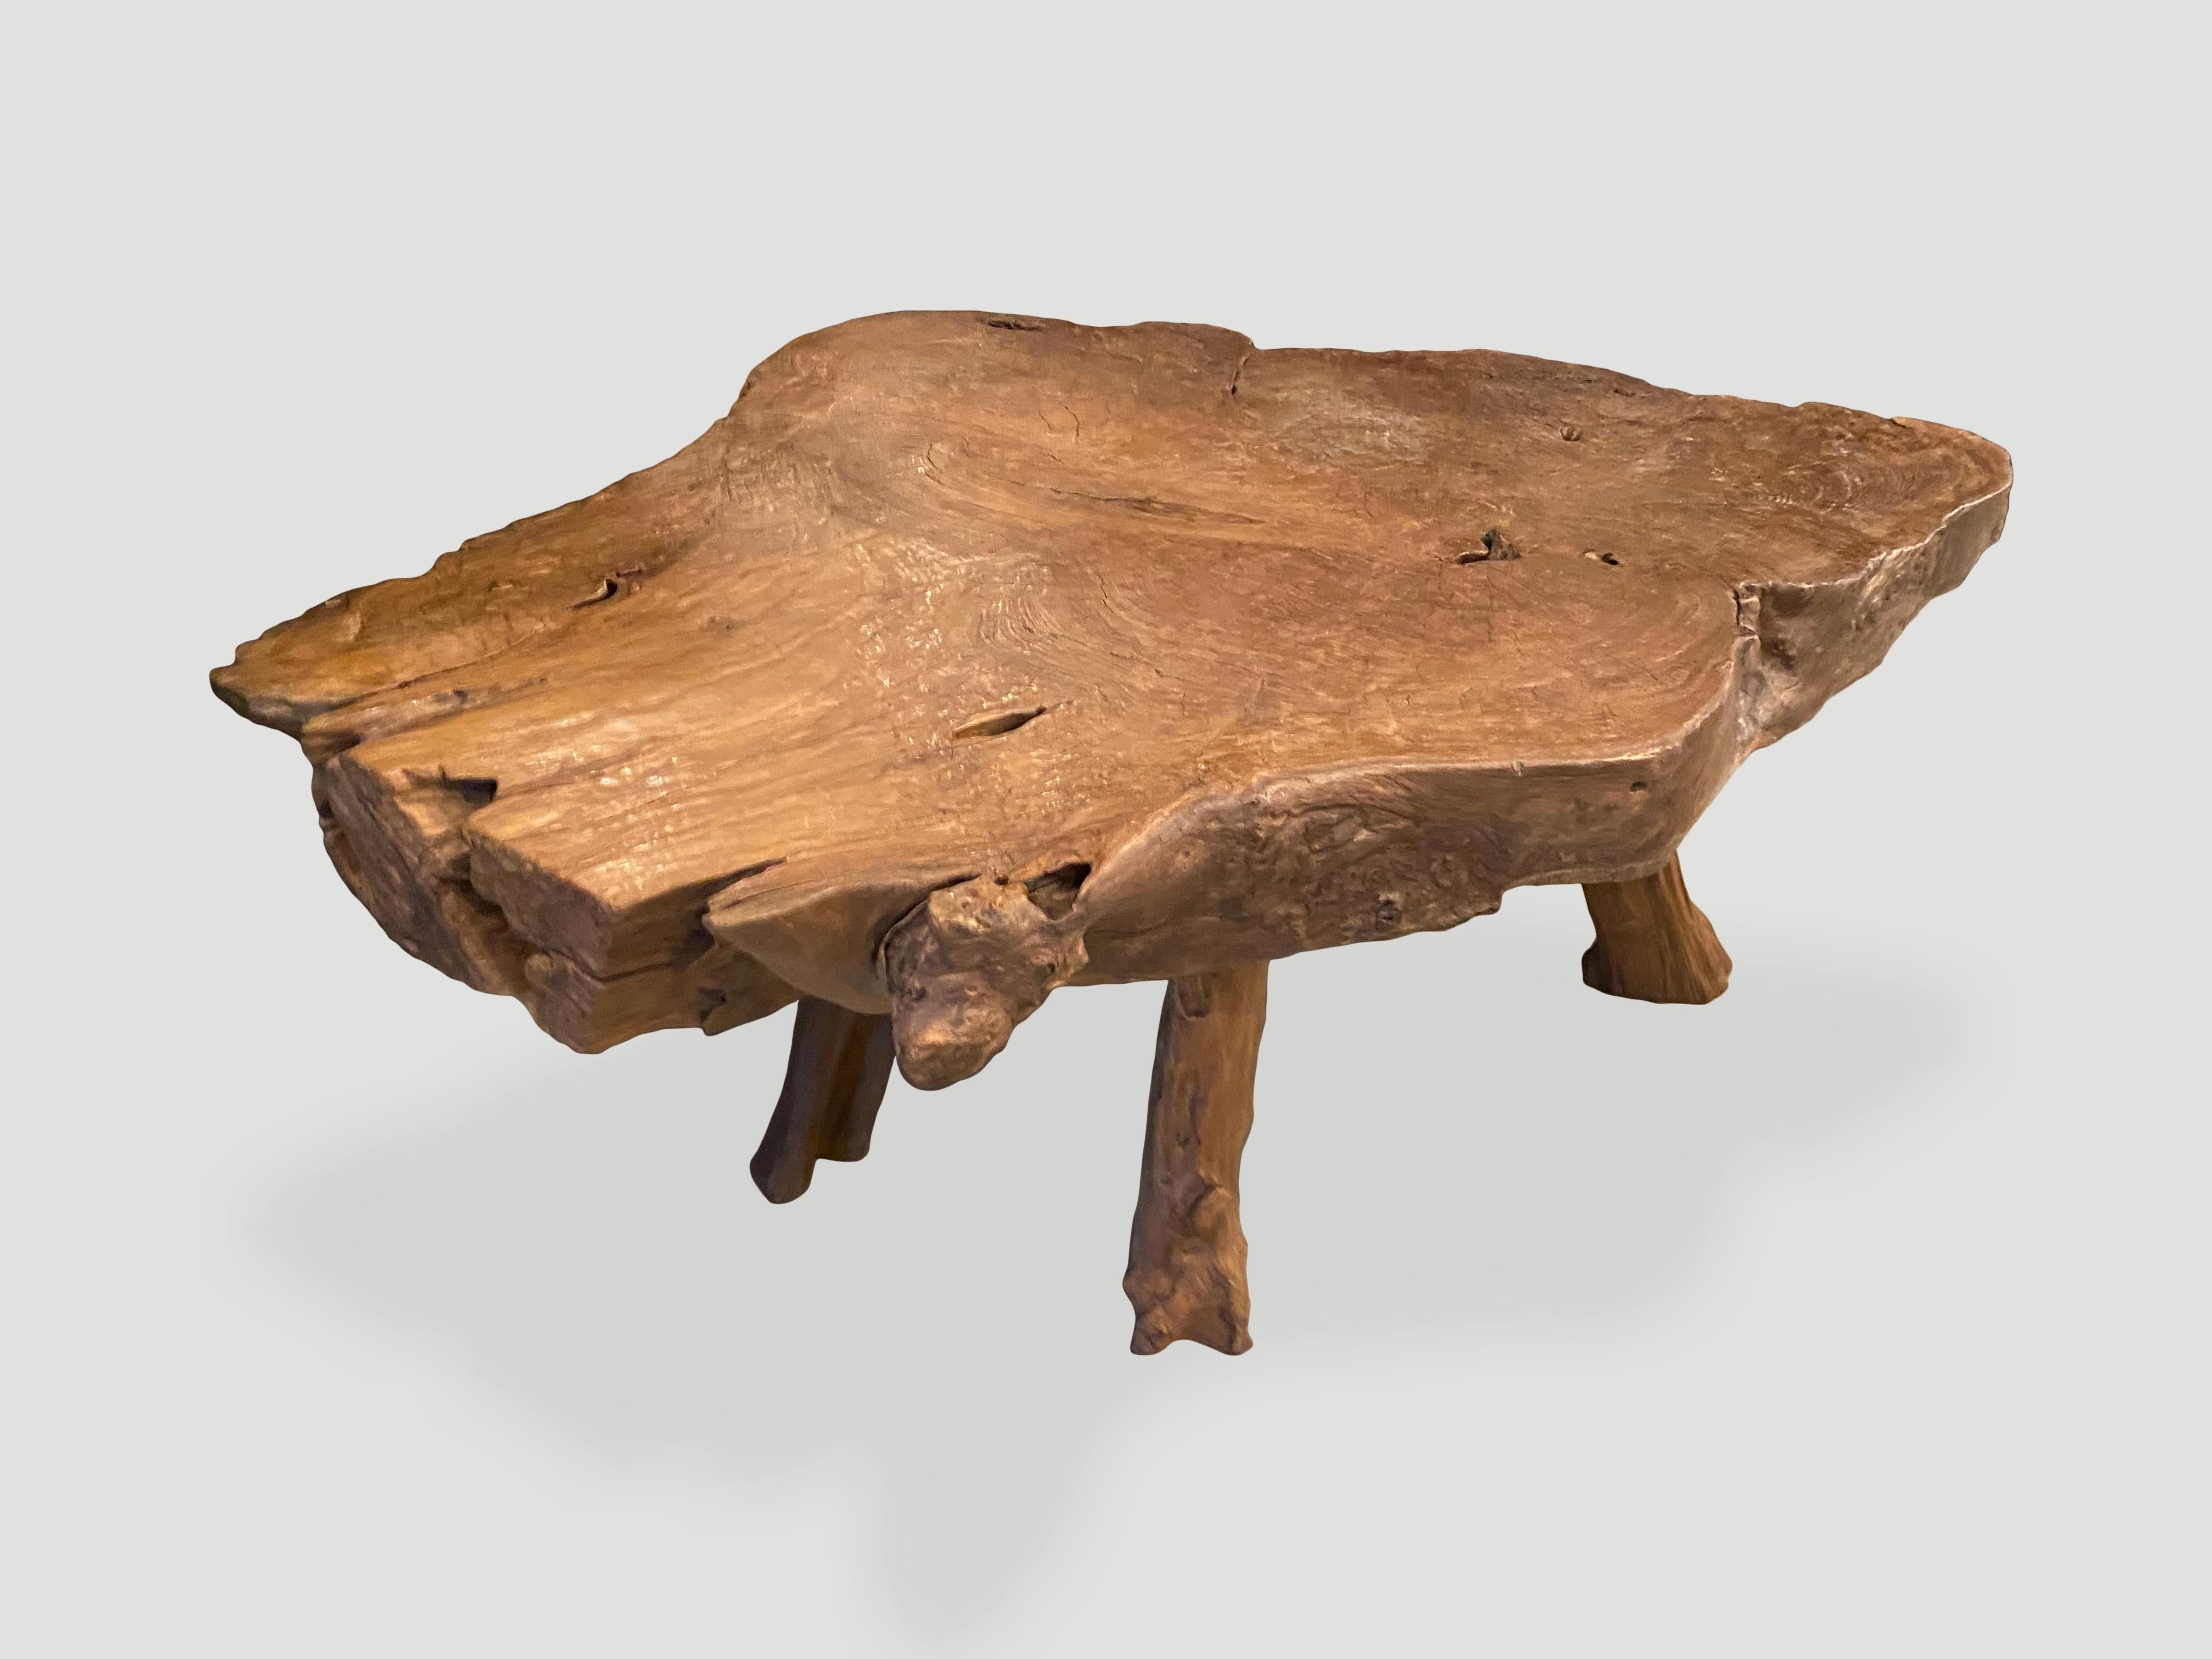 Single slab live edge coffee table made from reclaimed teak wood with beautiful patina. Own an Andrianna Shamaris original.

This coffee table was sourced in the spirit of wabi-sabi, a Japanese philosophy that beauty can be found in imperfection